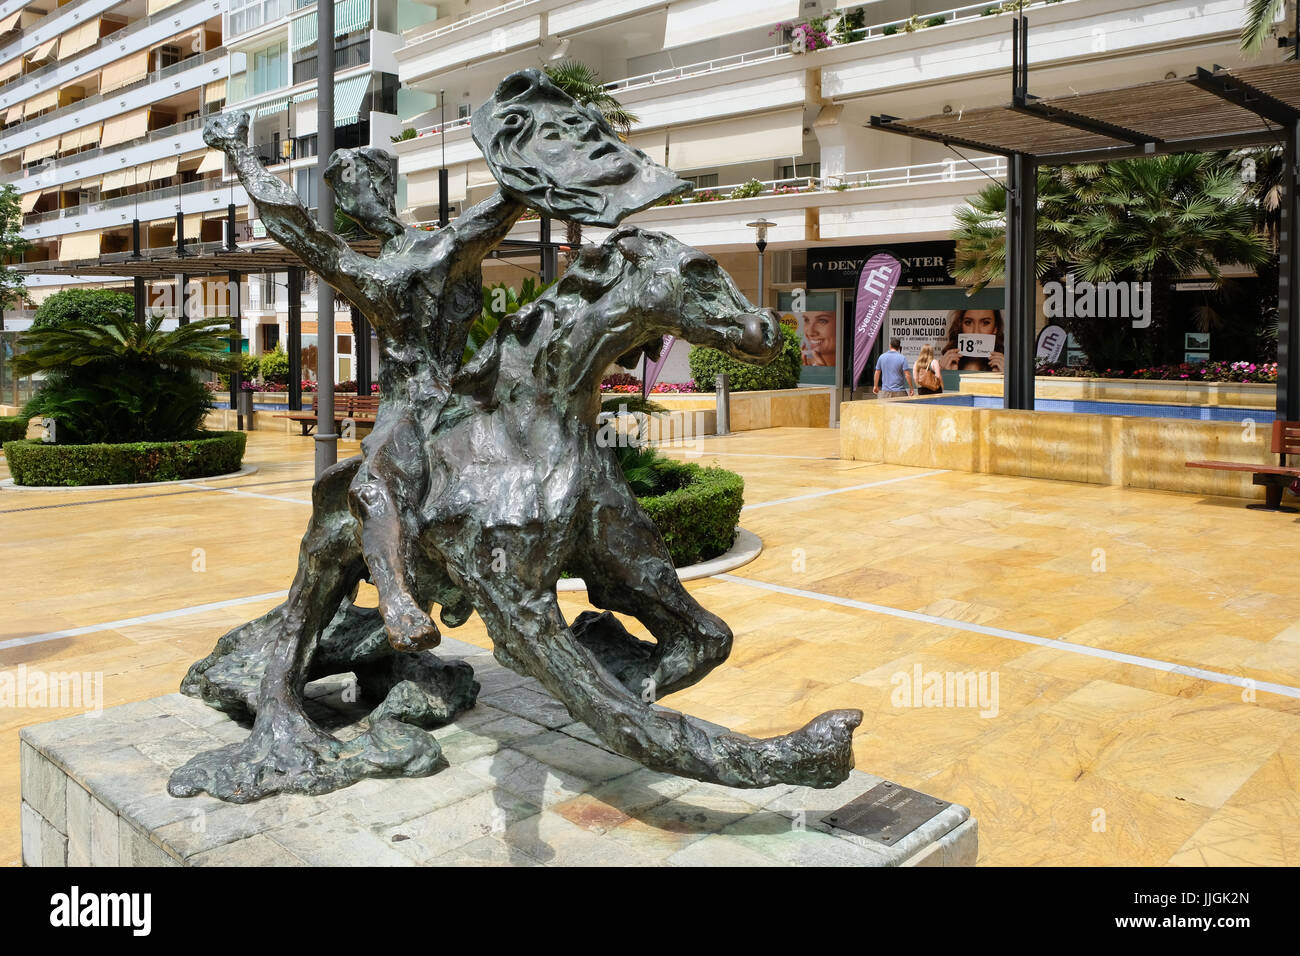 MARBELLA, ANDALUCIA/SPAIN - JULY 6 : Horse and Jockey Stumbling Statue by Salvador Dali in Marbella Spain on July 6, 2017 Stock Photo